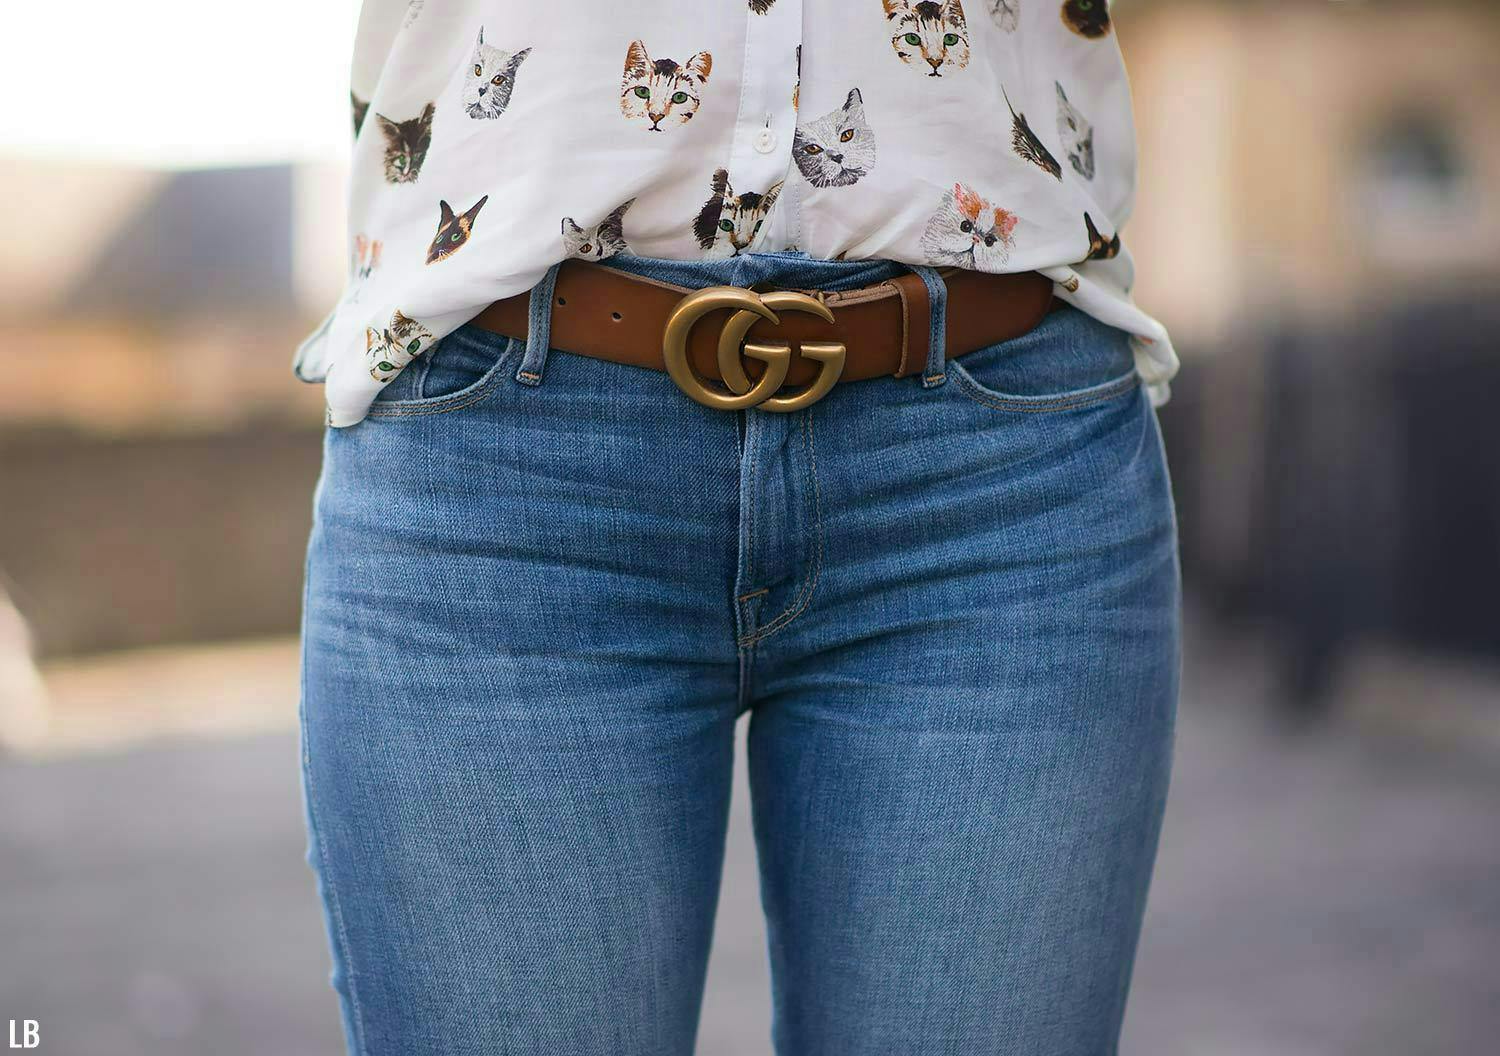 pants clothing apparel belt accessories accessory person human buckle jeans